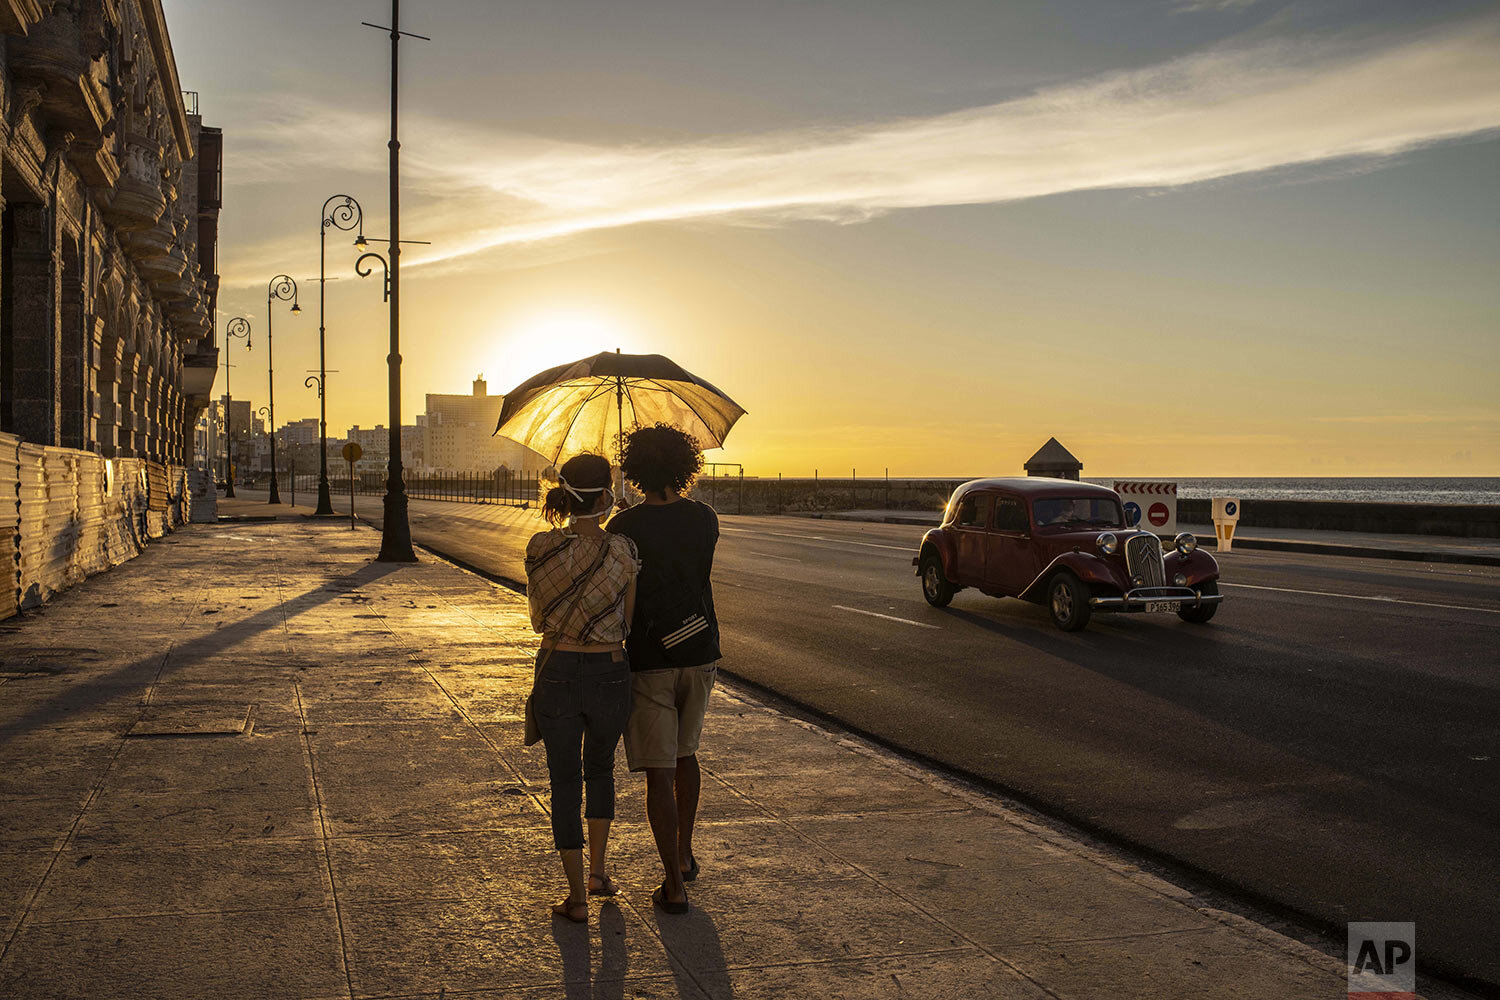  A couple wearing masks amid the new coronavirus pandemic walk on the Malecon seawall at sunset in Havana, Cuba, Aug. 31, 2020. Authorities introduced new measures for 15 days aimed at containing the spread in Havana, like a curfew from 7pm until 5am